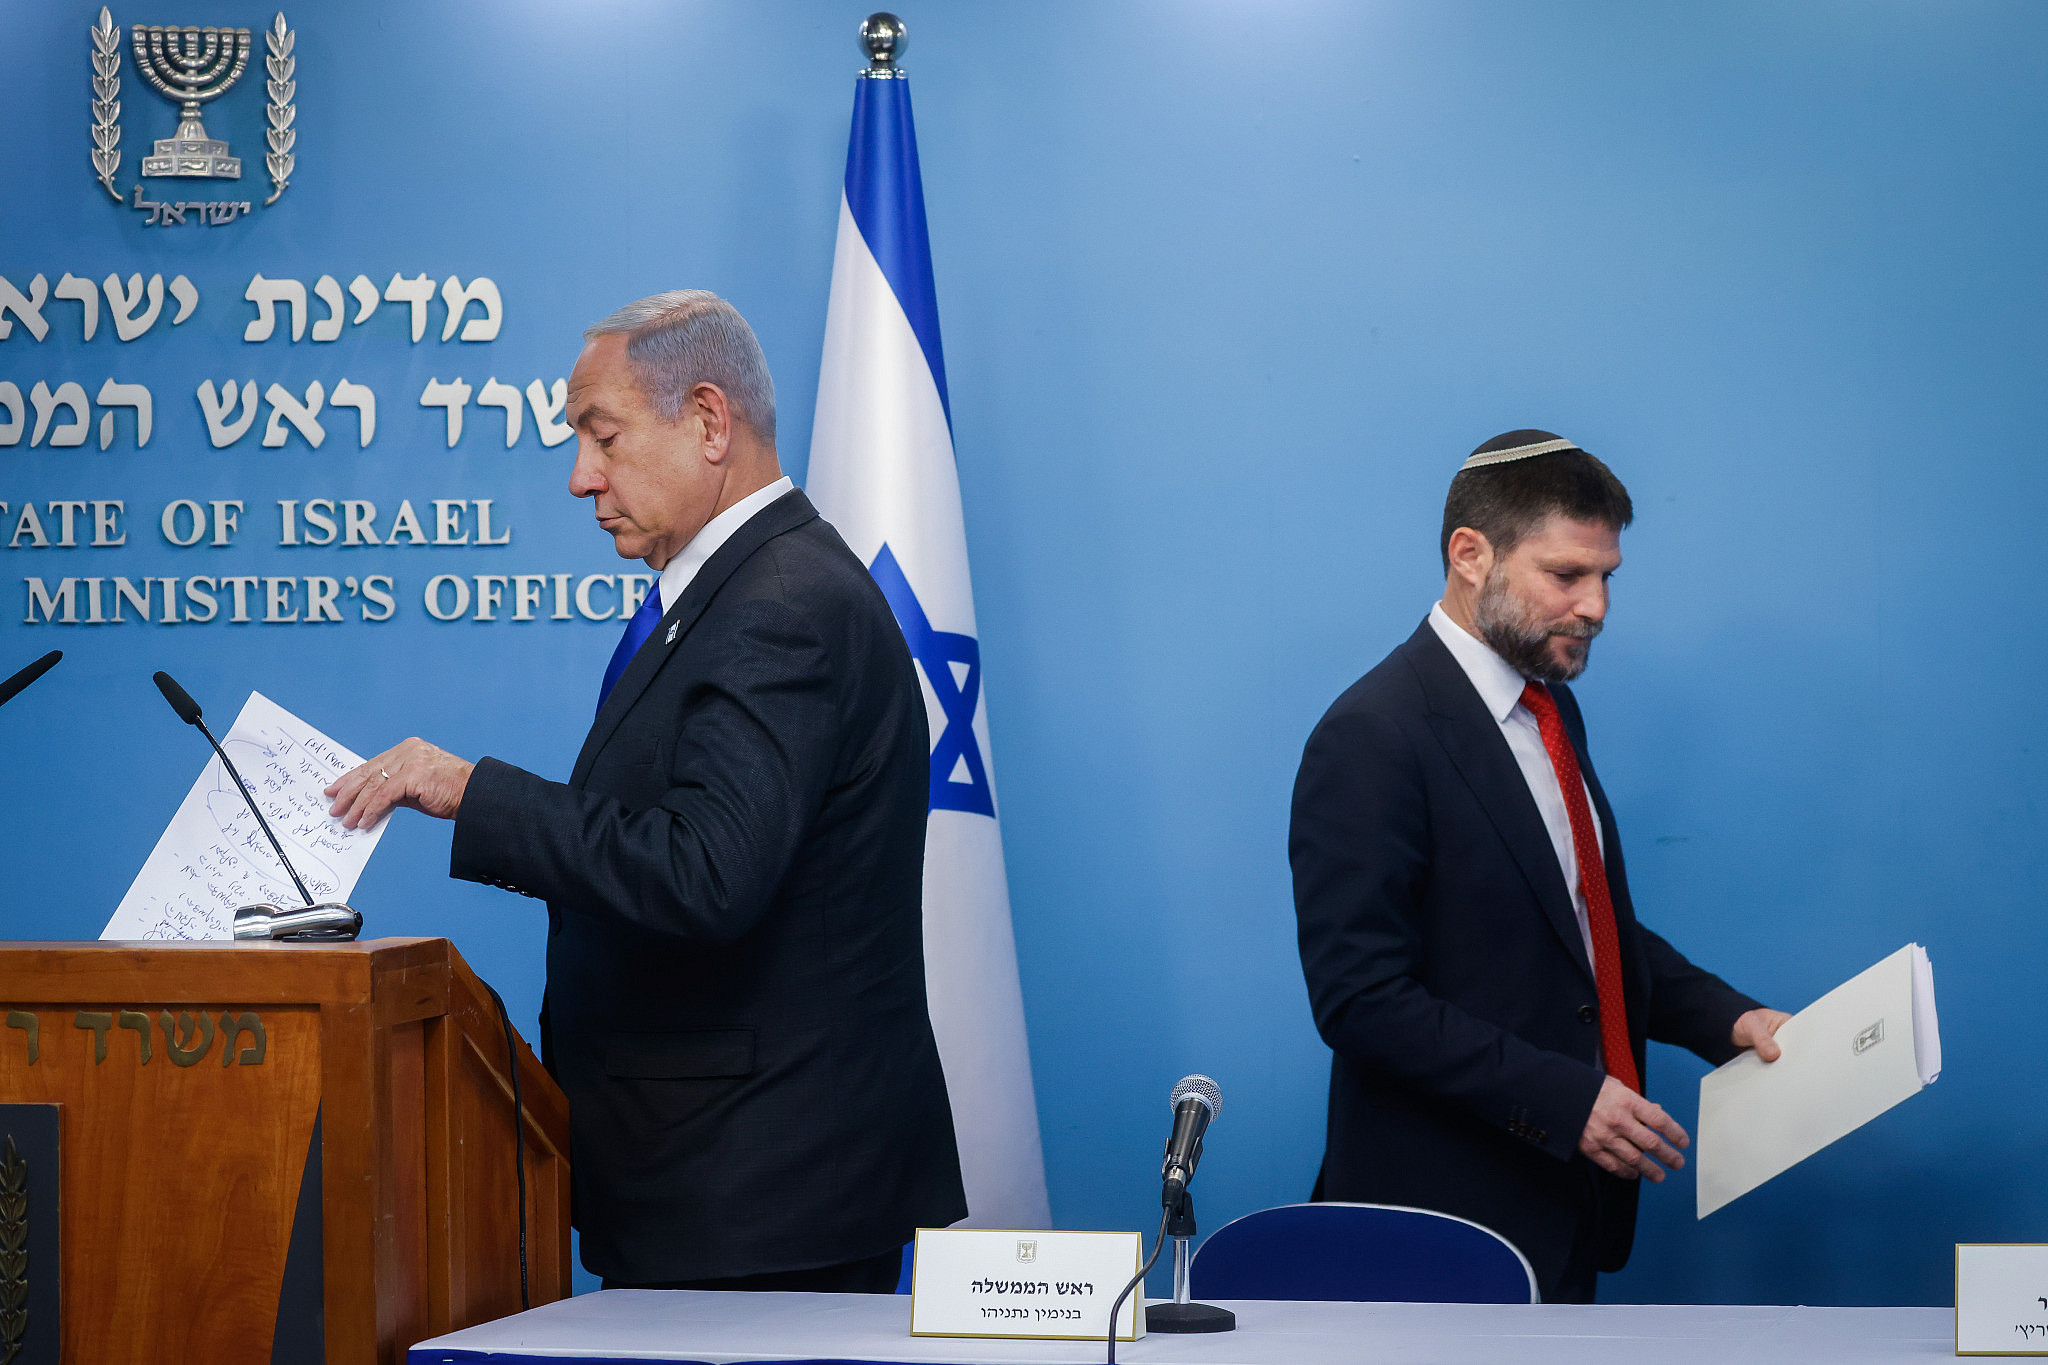 Israeli Prime Minister Benjamin Netanyahu gives a press conference with Minister of Finance Bezalel Smotrich at the Prime Minister's office in Jerusalem, January 11, 2023. (Olivier Fitoussi/Flash90)